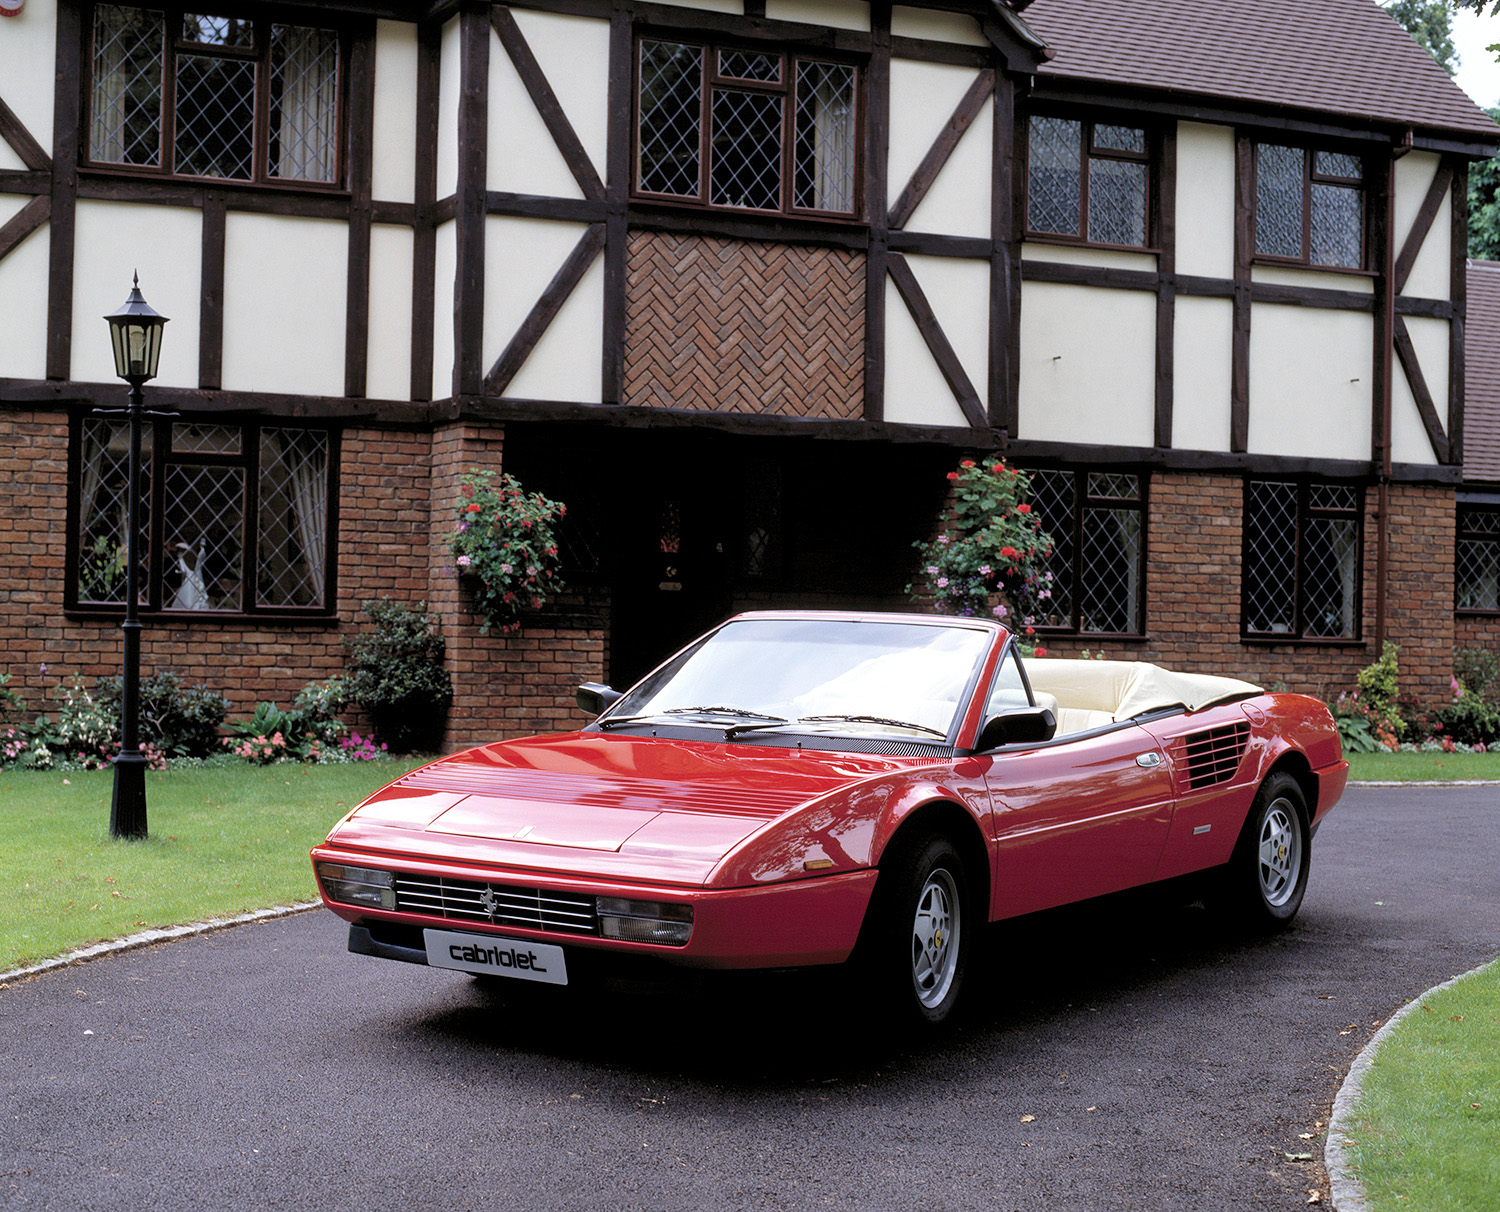 Red Ferrari Mondial Cabriolet parked in front of a house, this is the cheapest Ferrari one can currently buy